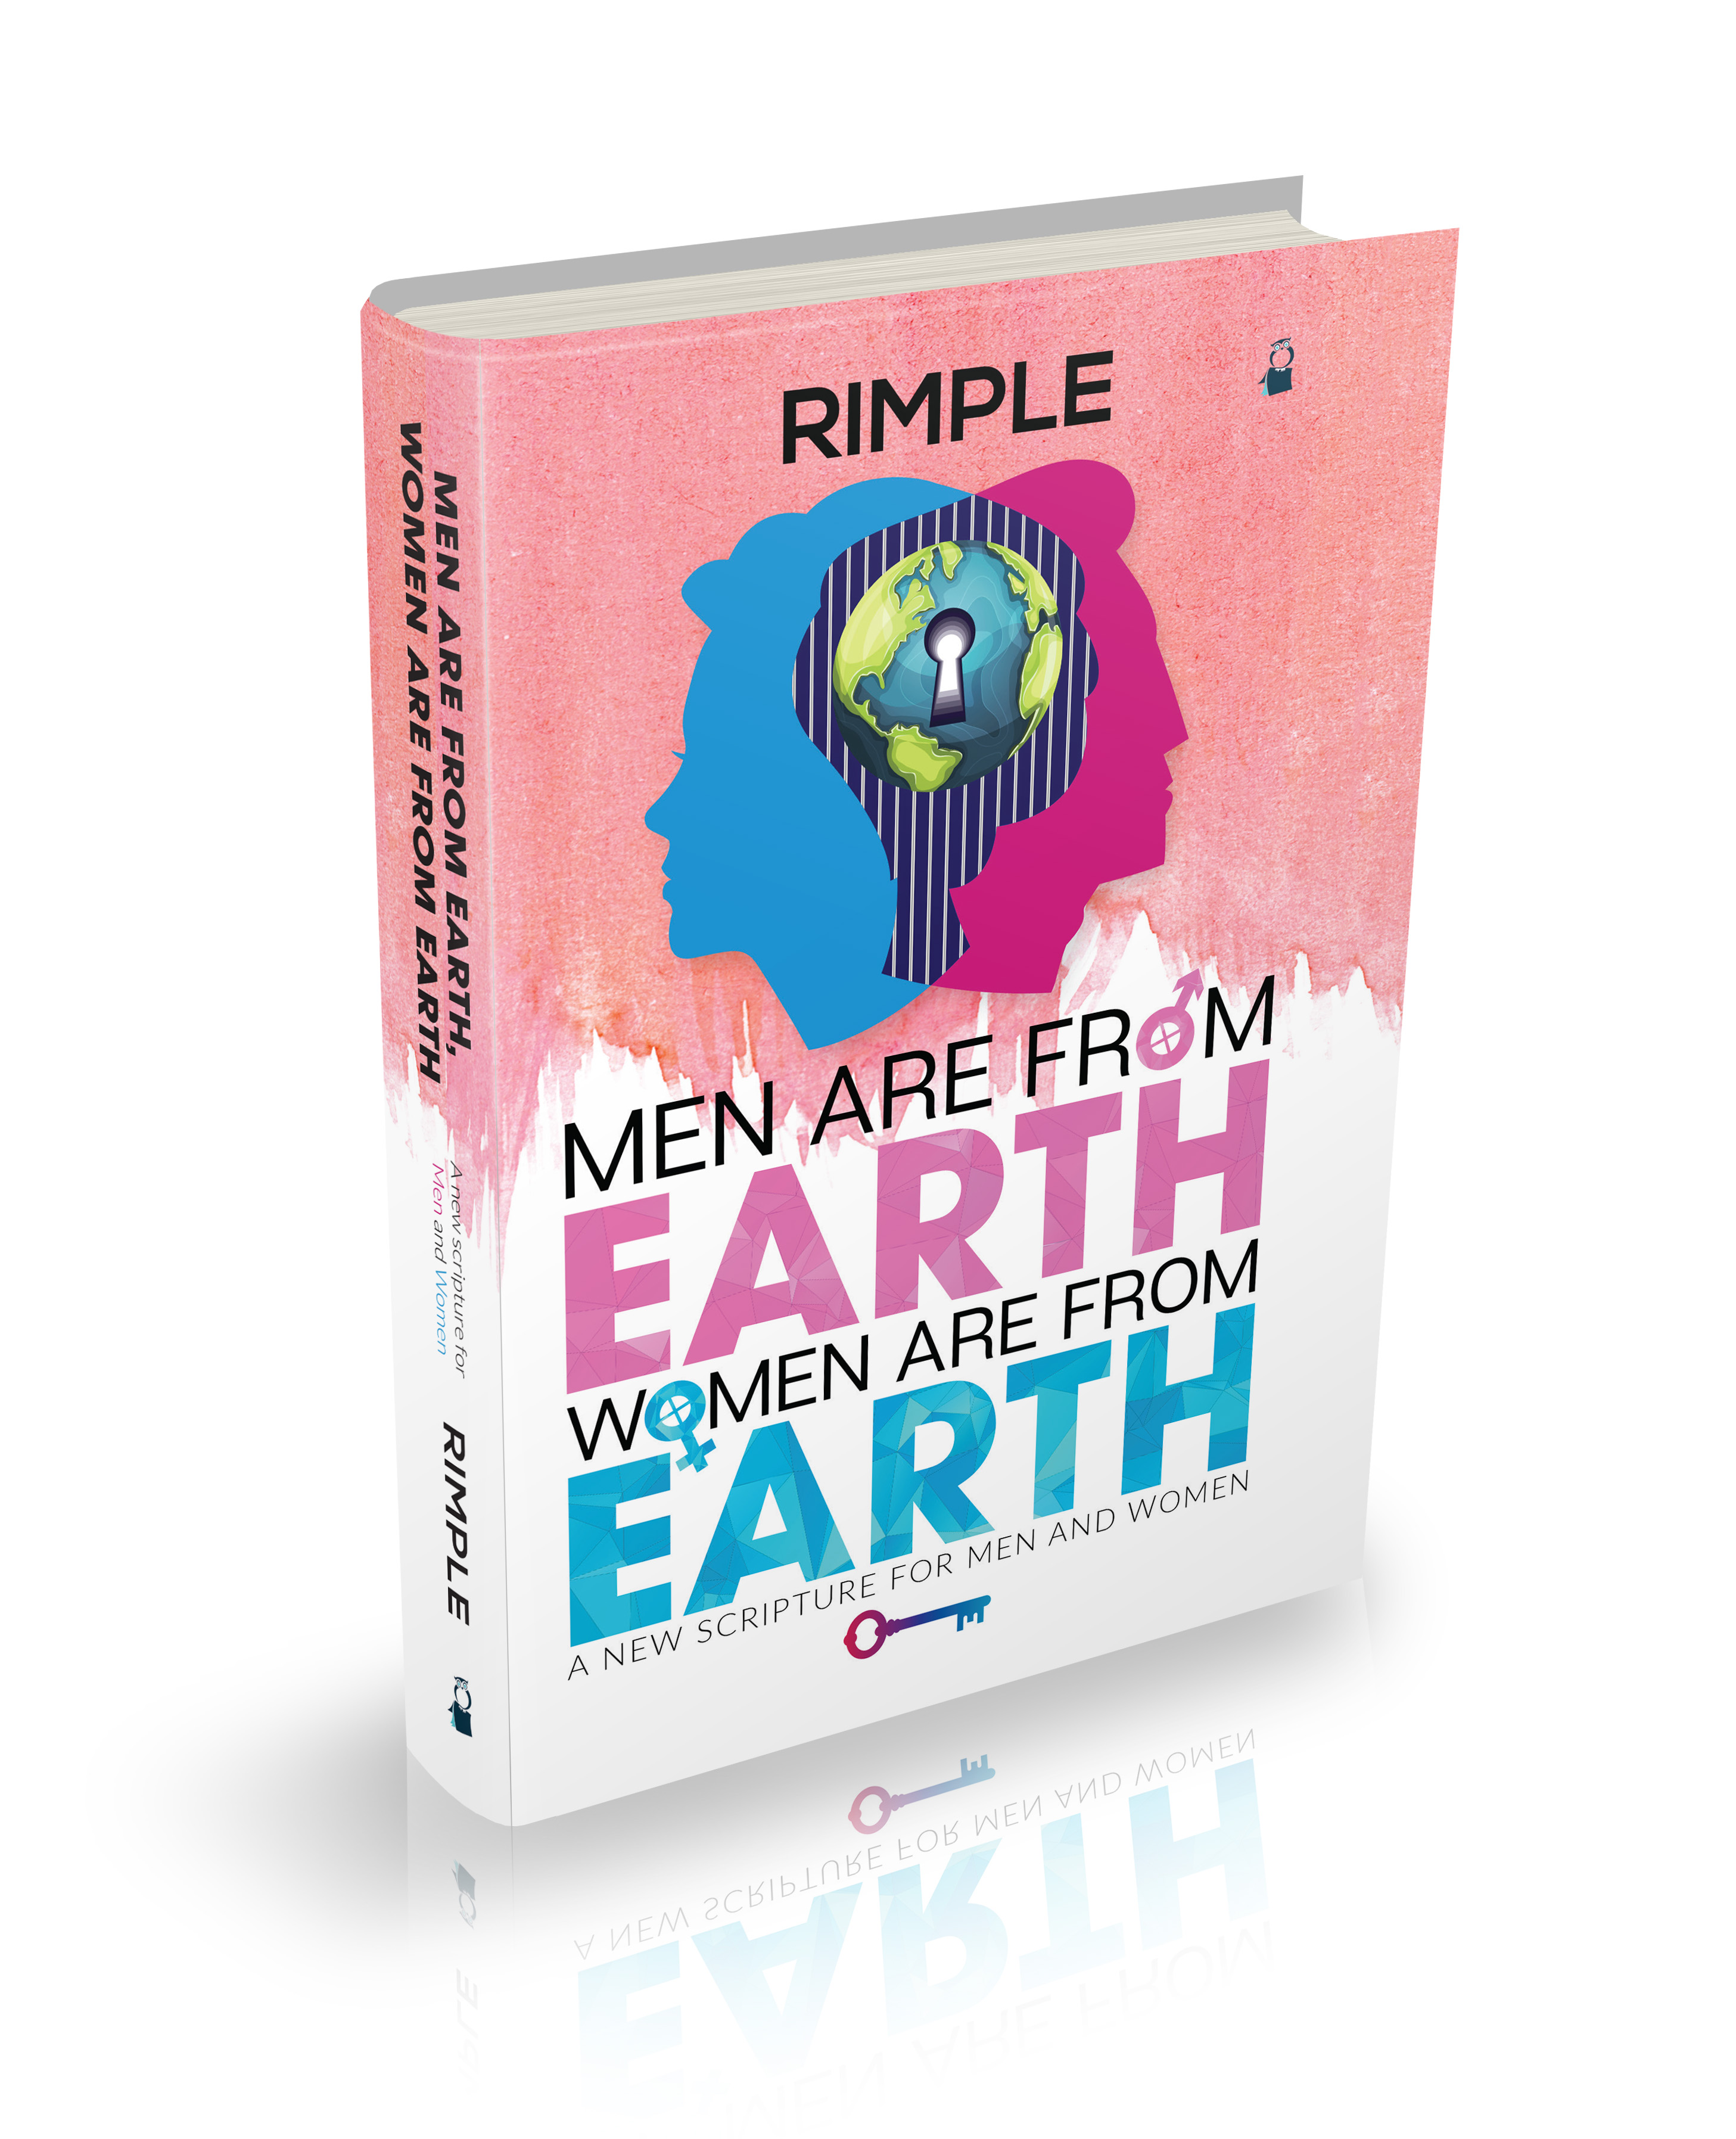 Men are from Earth, Women are from Earth – A New Scripture for Men and Women